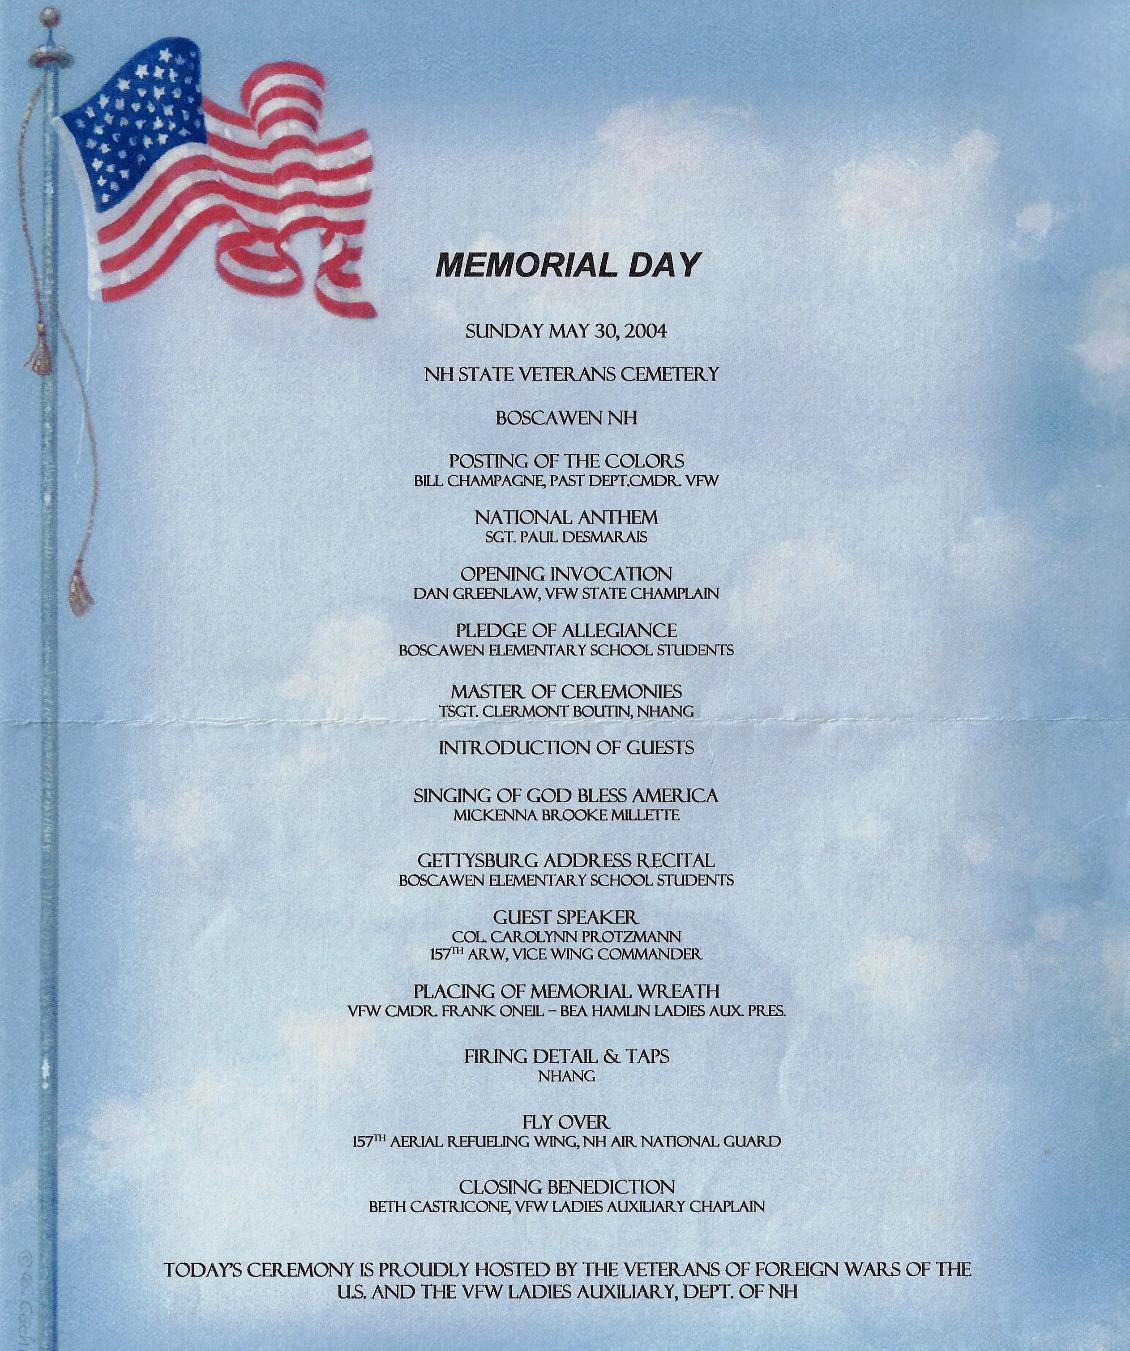 Memorial Day Program at the NH State Veterans Cemetery May 30 2004